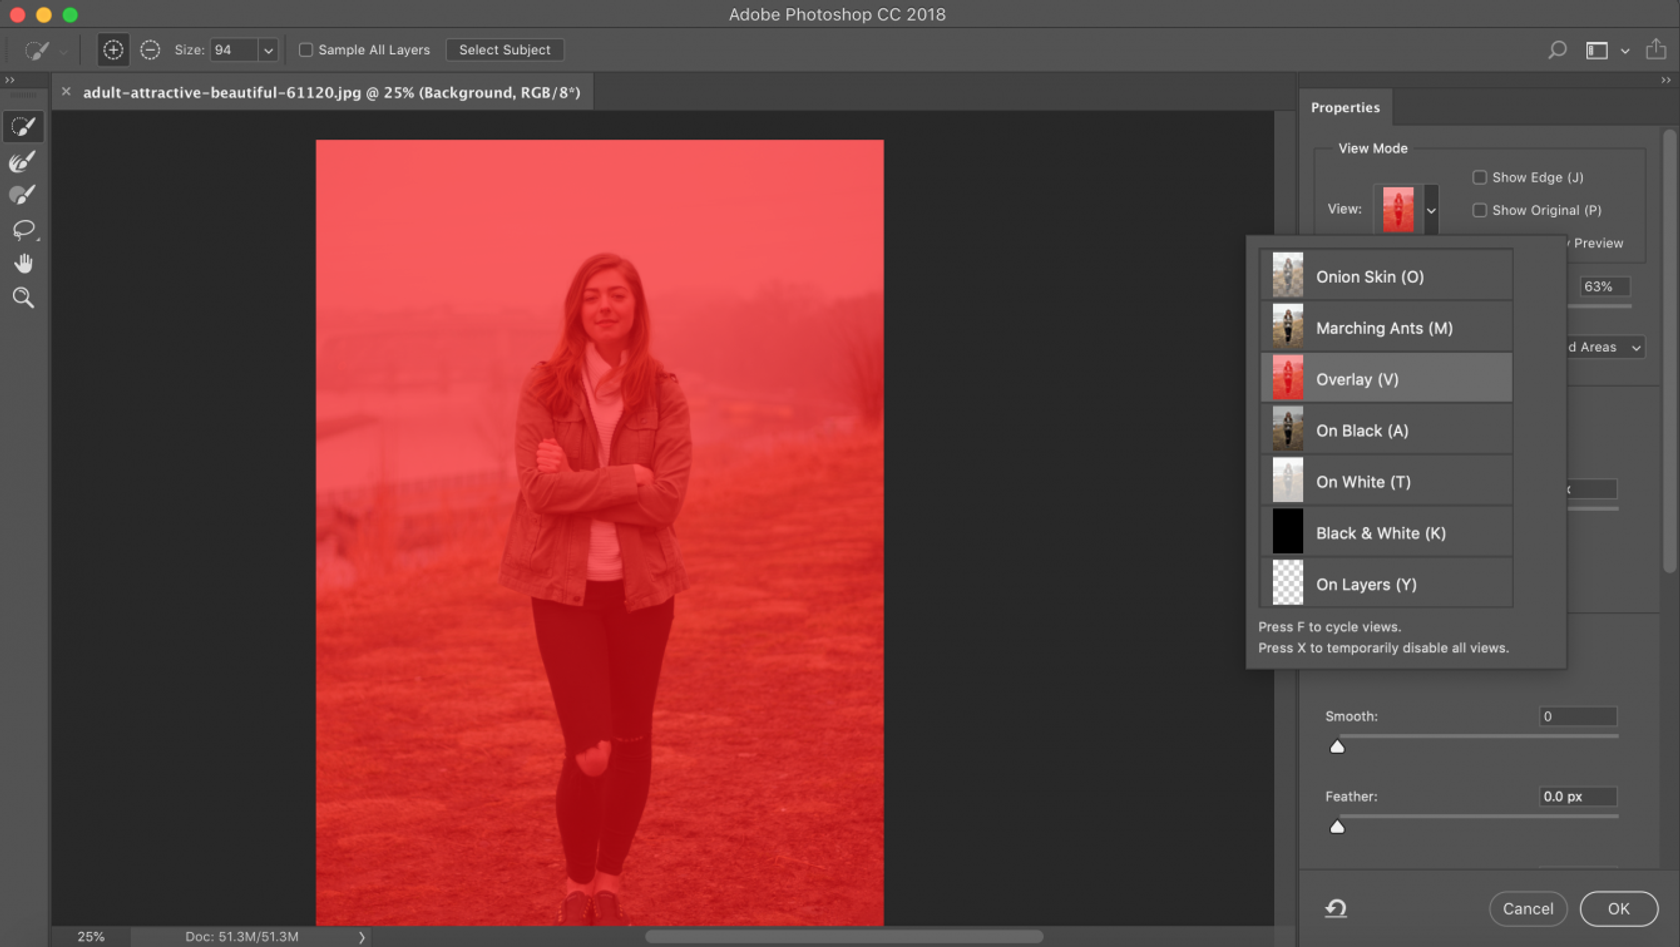 How to Smooth Edges in Photoshop: Photoshop Feather and Other Tools Image4